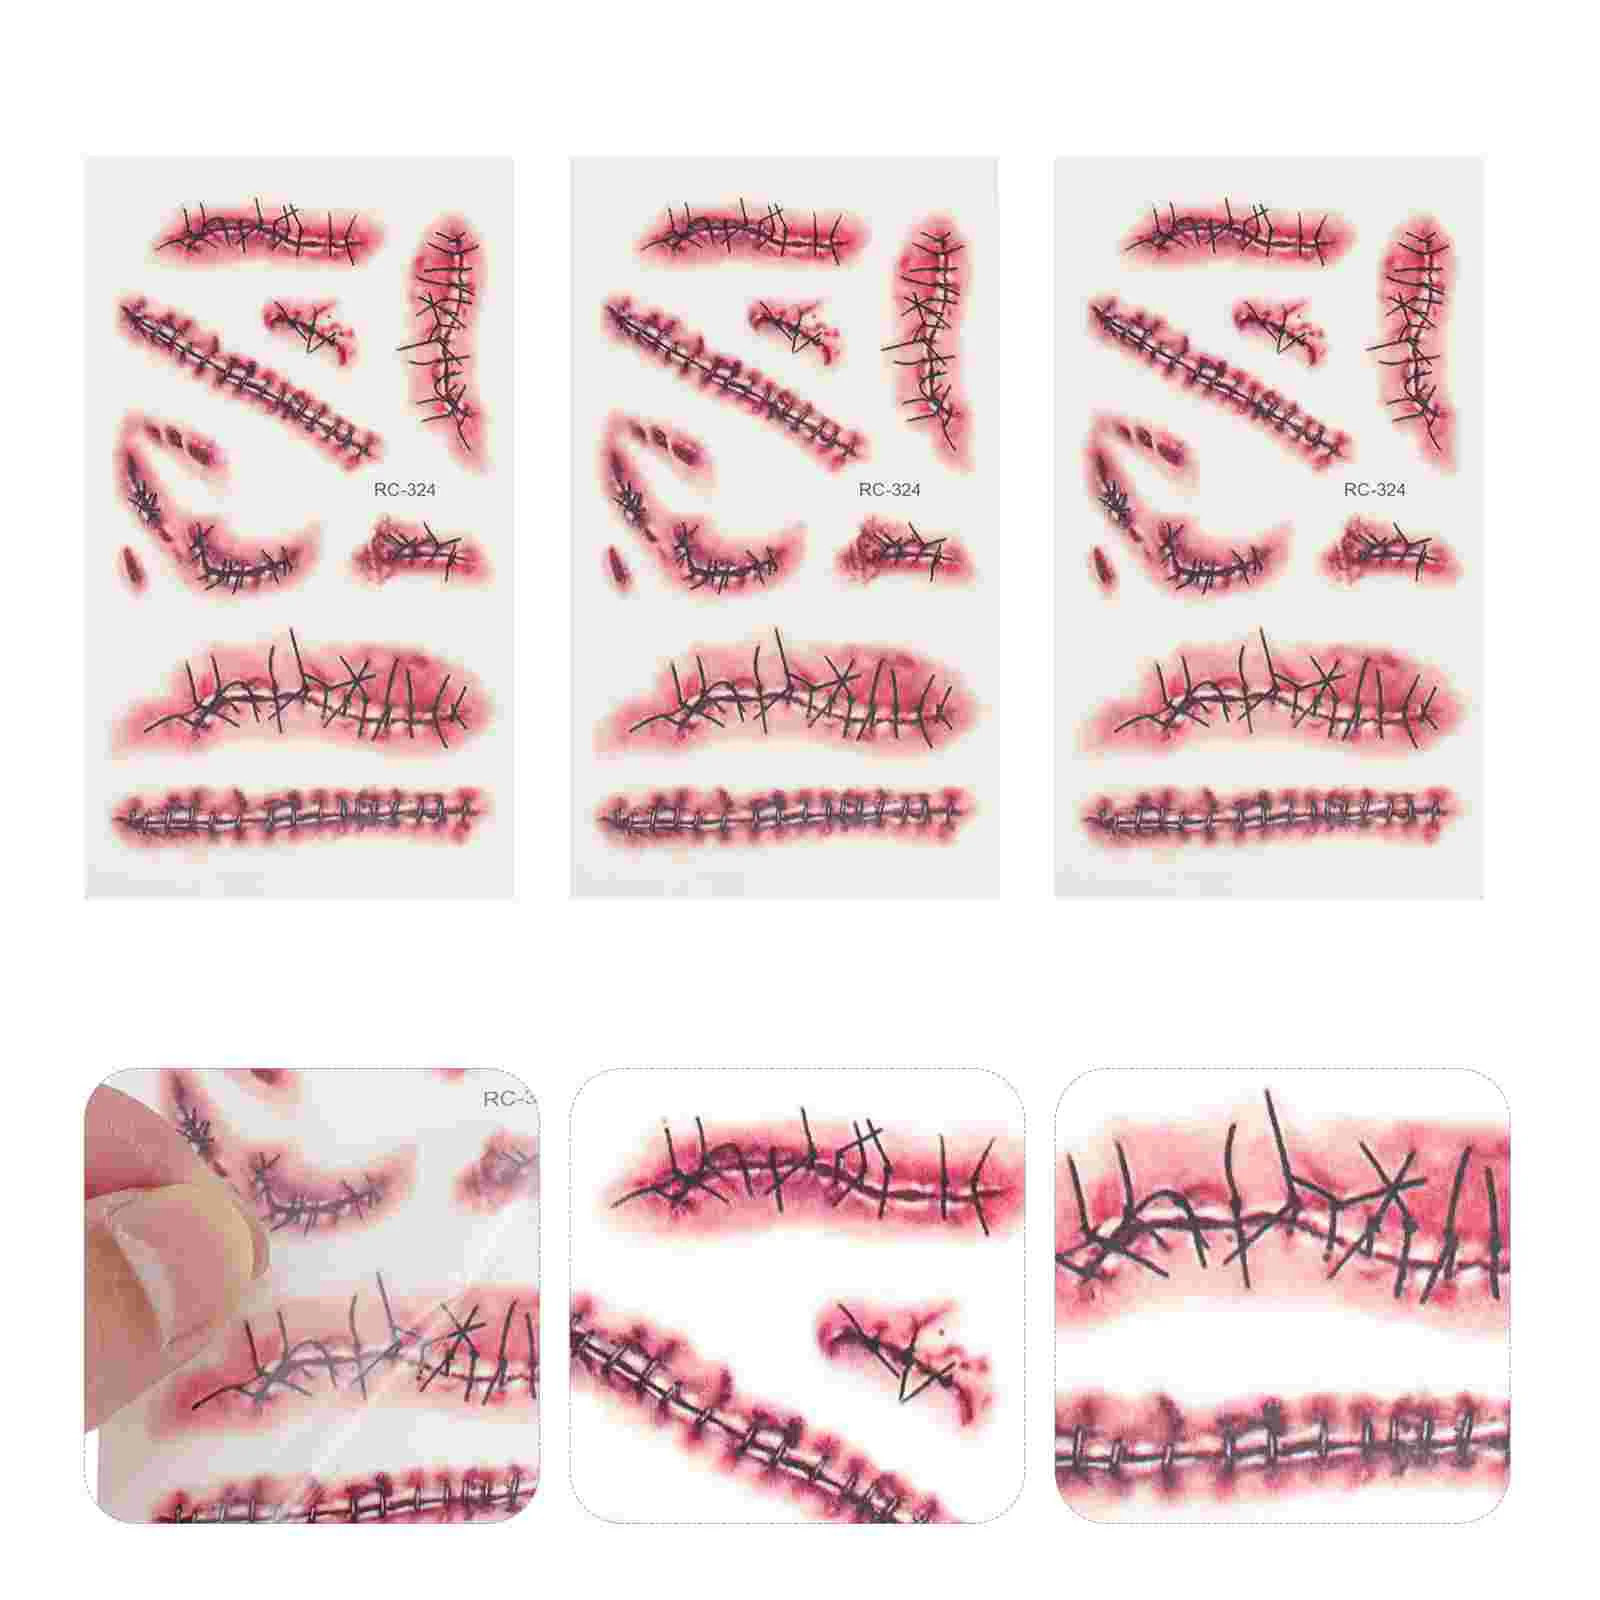 

5 Sheets Scar Tattoo Stickers Halloween Decals Wound Stitch Waterproof Body Fake Tattoos Transfer Temporary